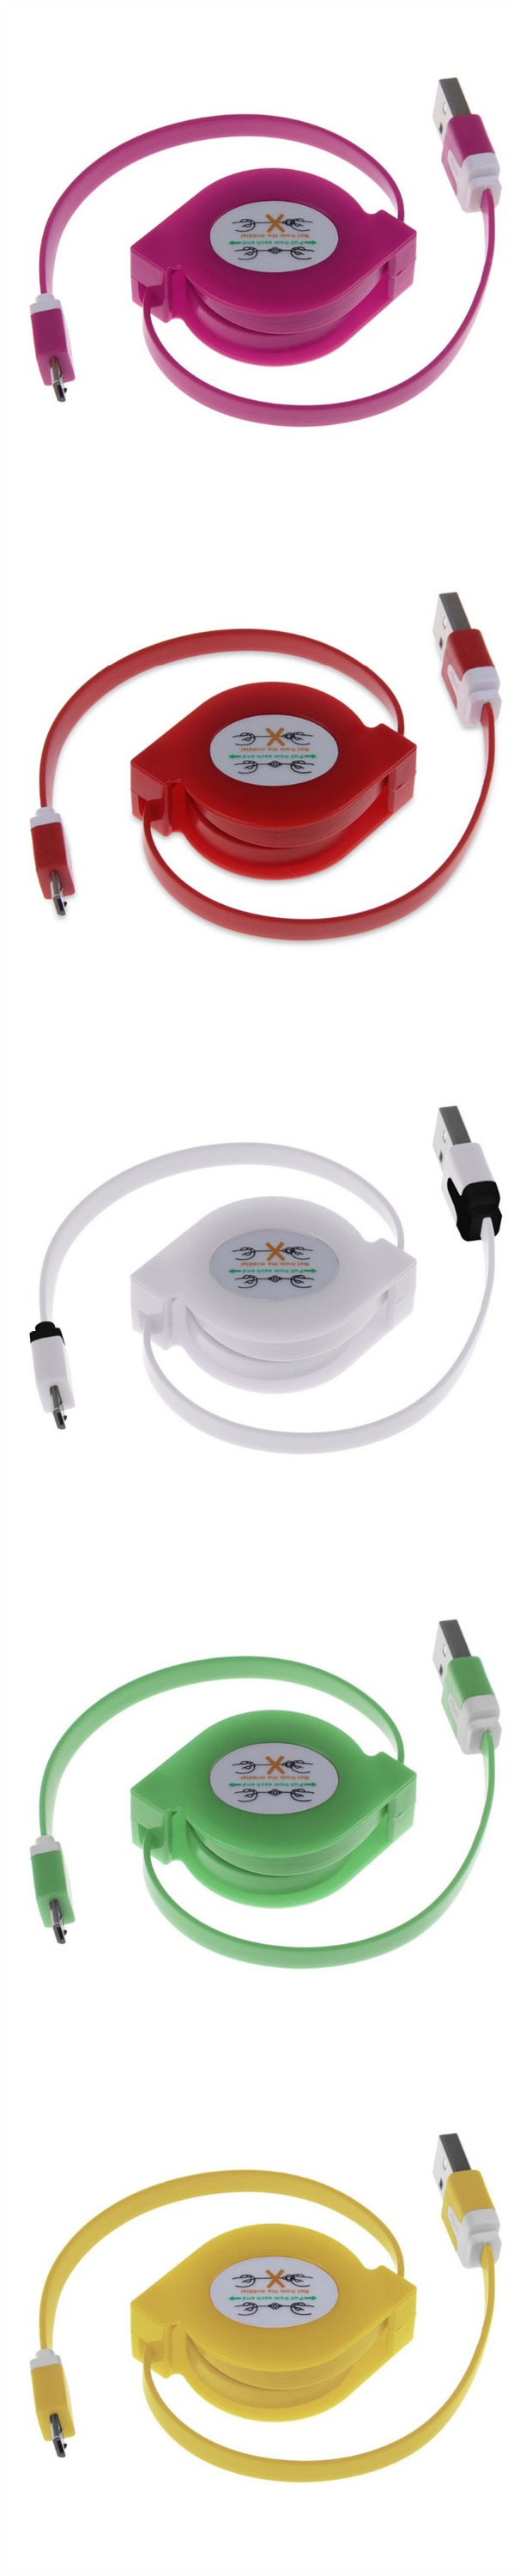 high quality retractable xnxx video converter usb aux cable media player cu